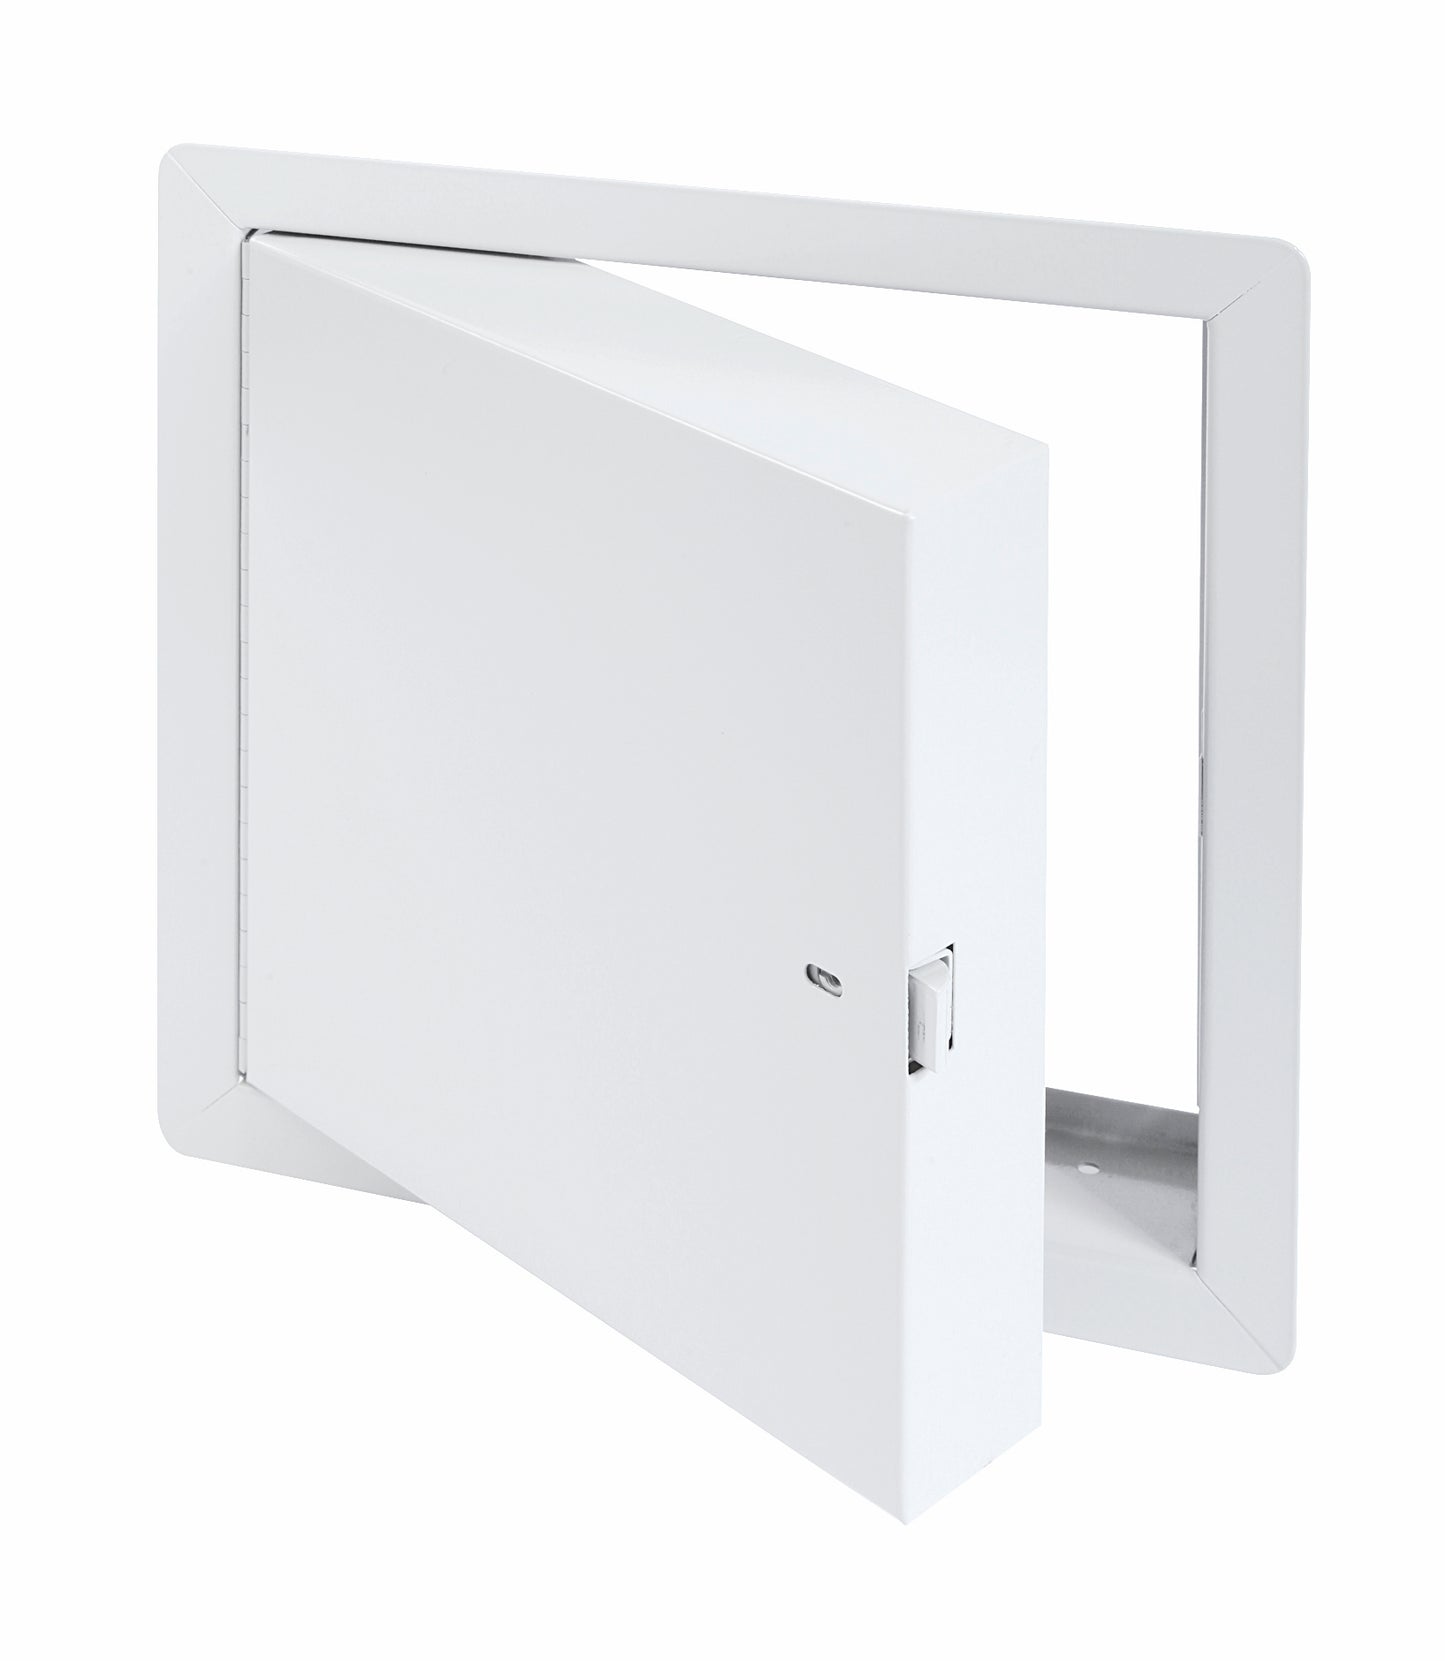 36"x36" Fire-rated Insulated Access Door with Exposed Flange, Cendrex